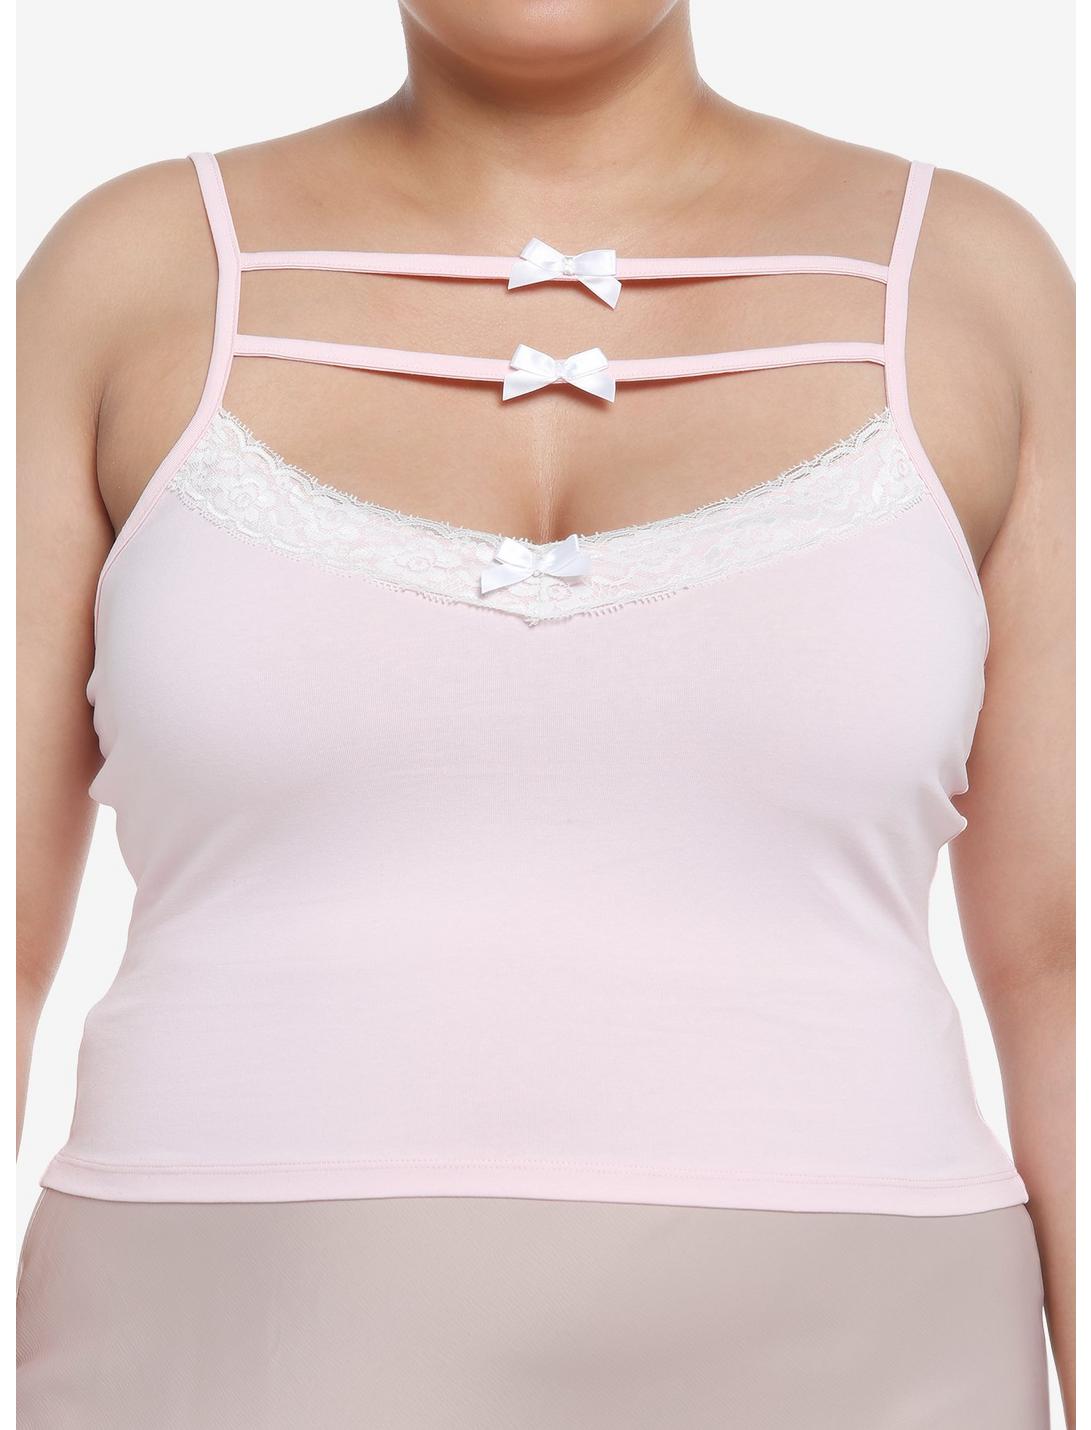 Sweet Society Pink & White Bow Strappy Girls Cami Plus Size, PINK, hi-res